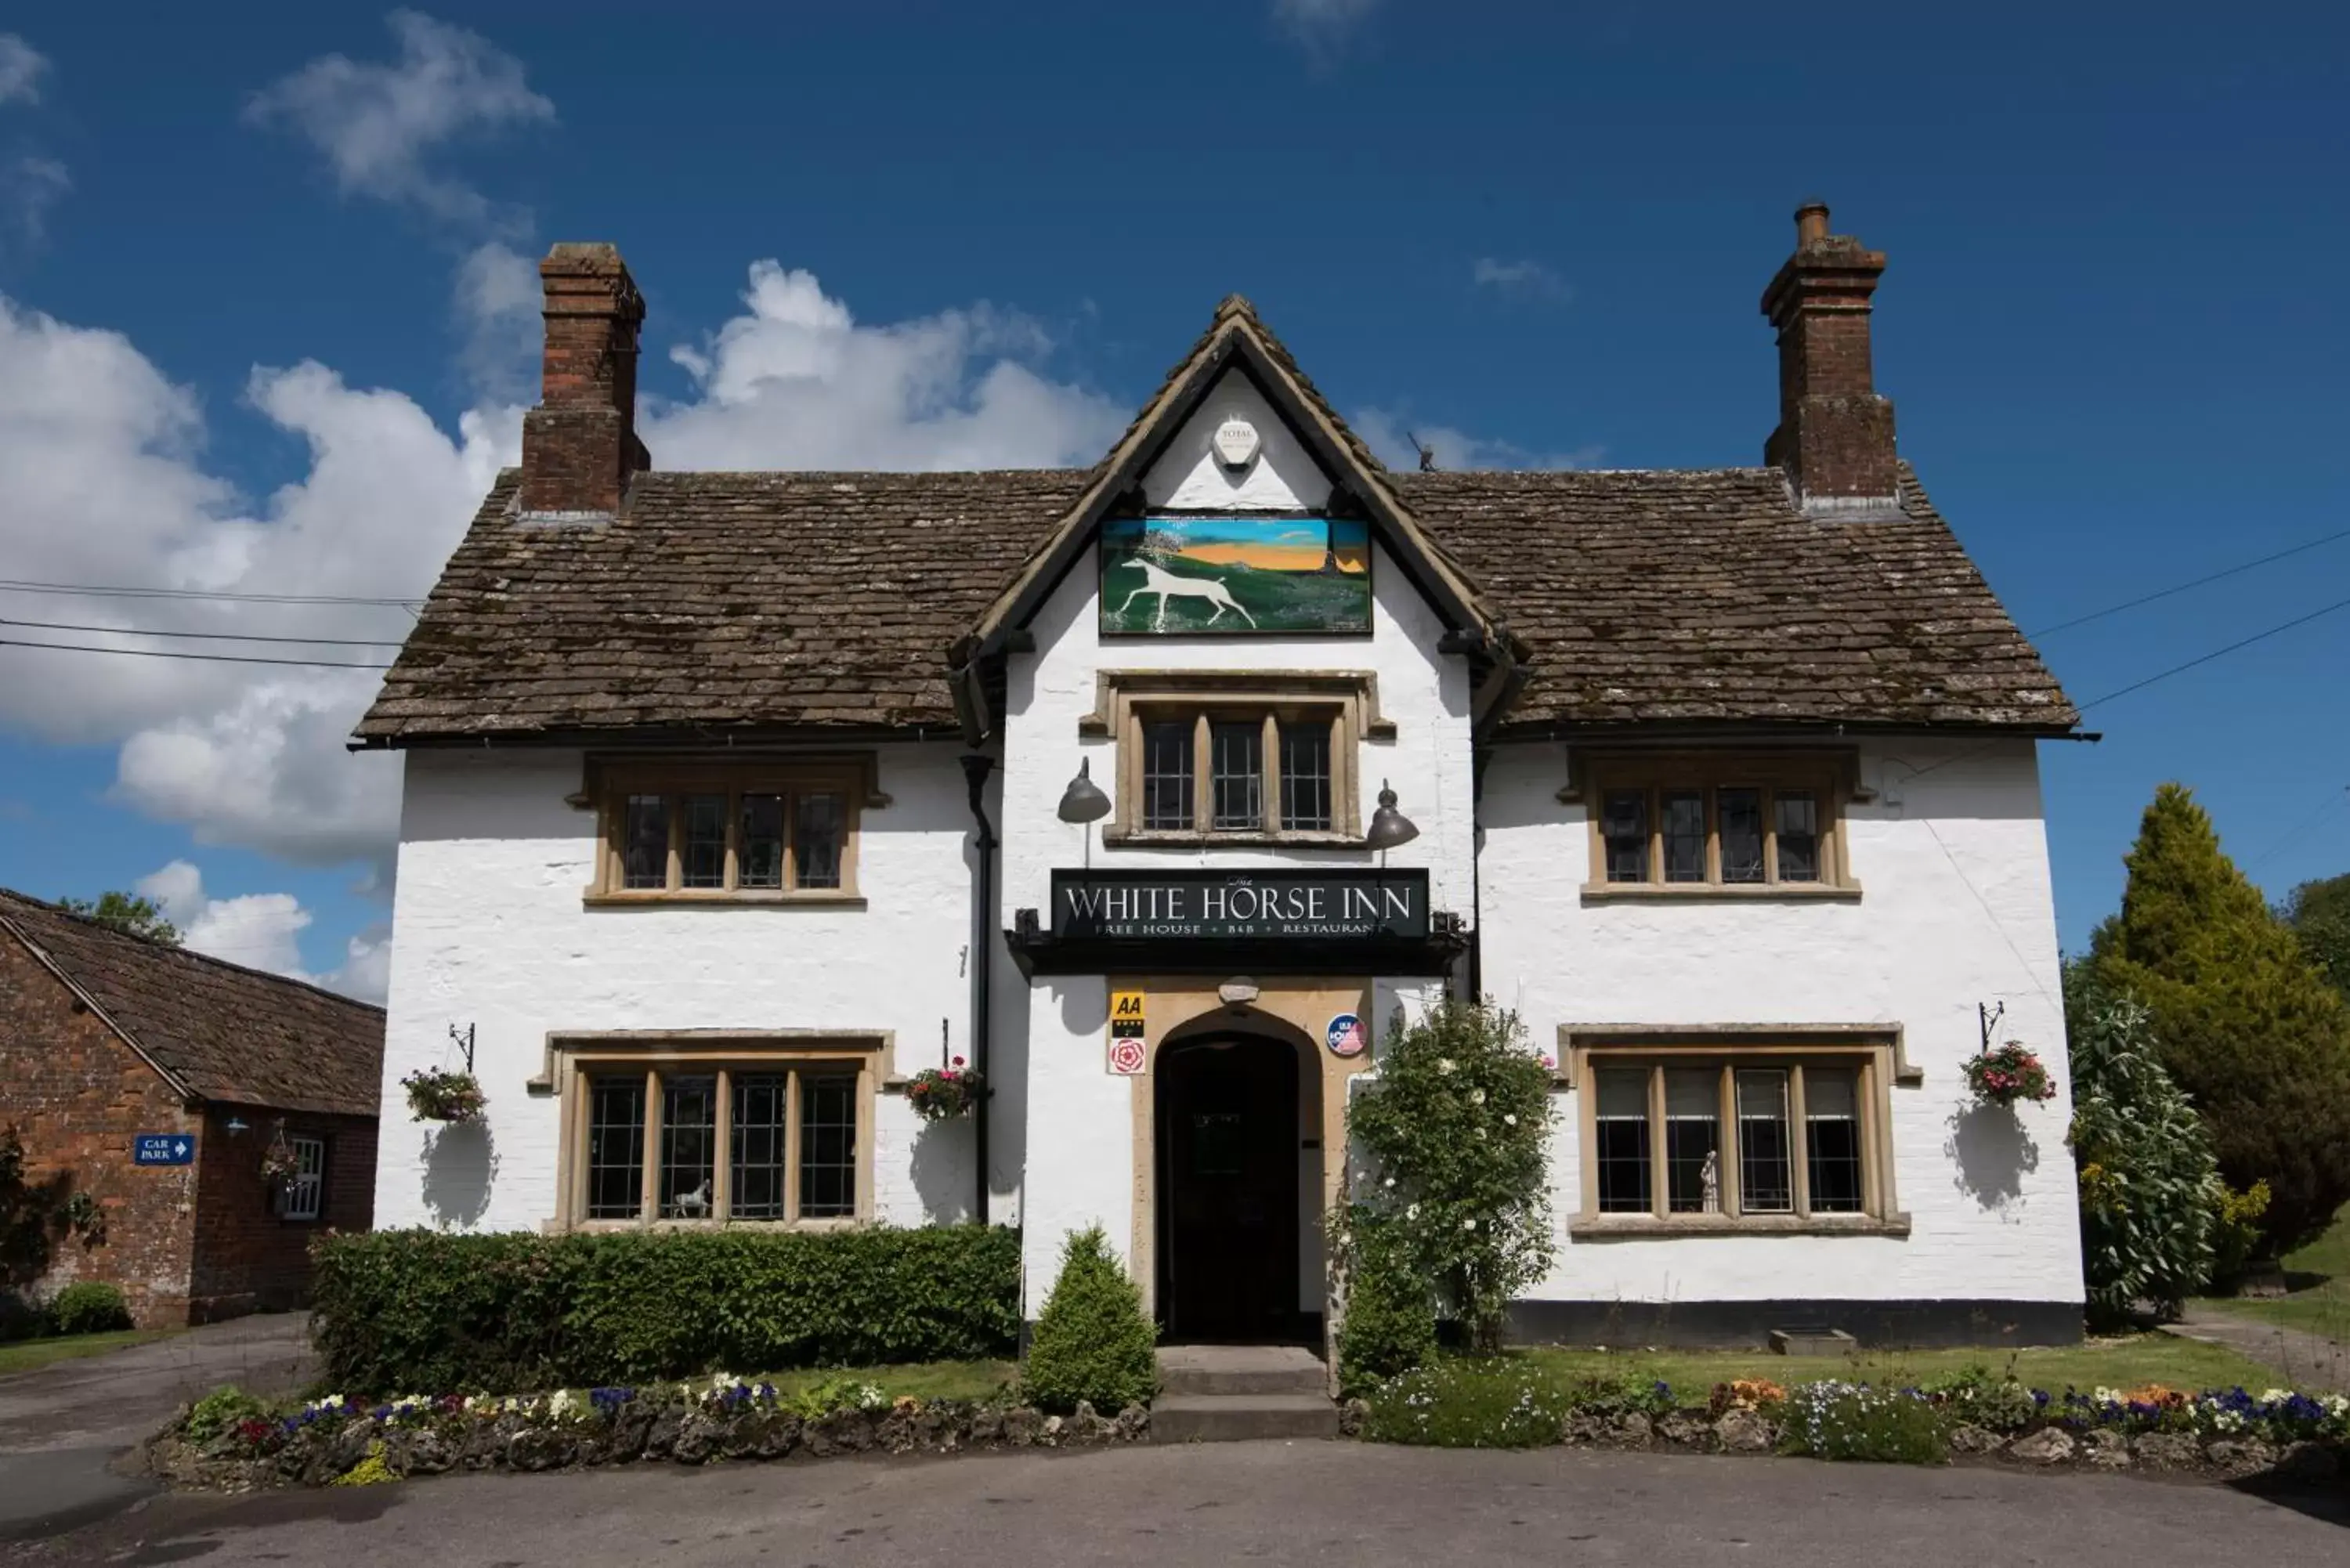 Property Building in The White Horse Inn